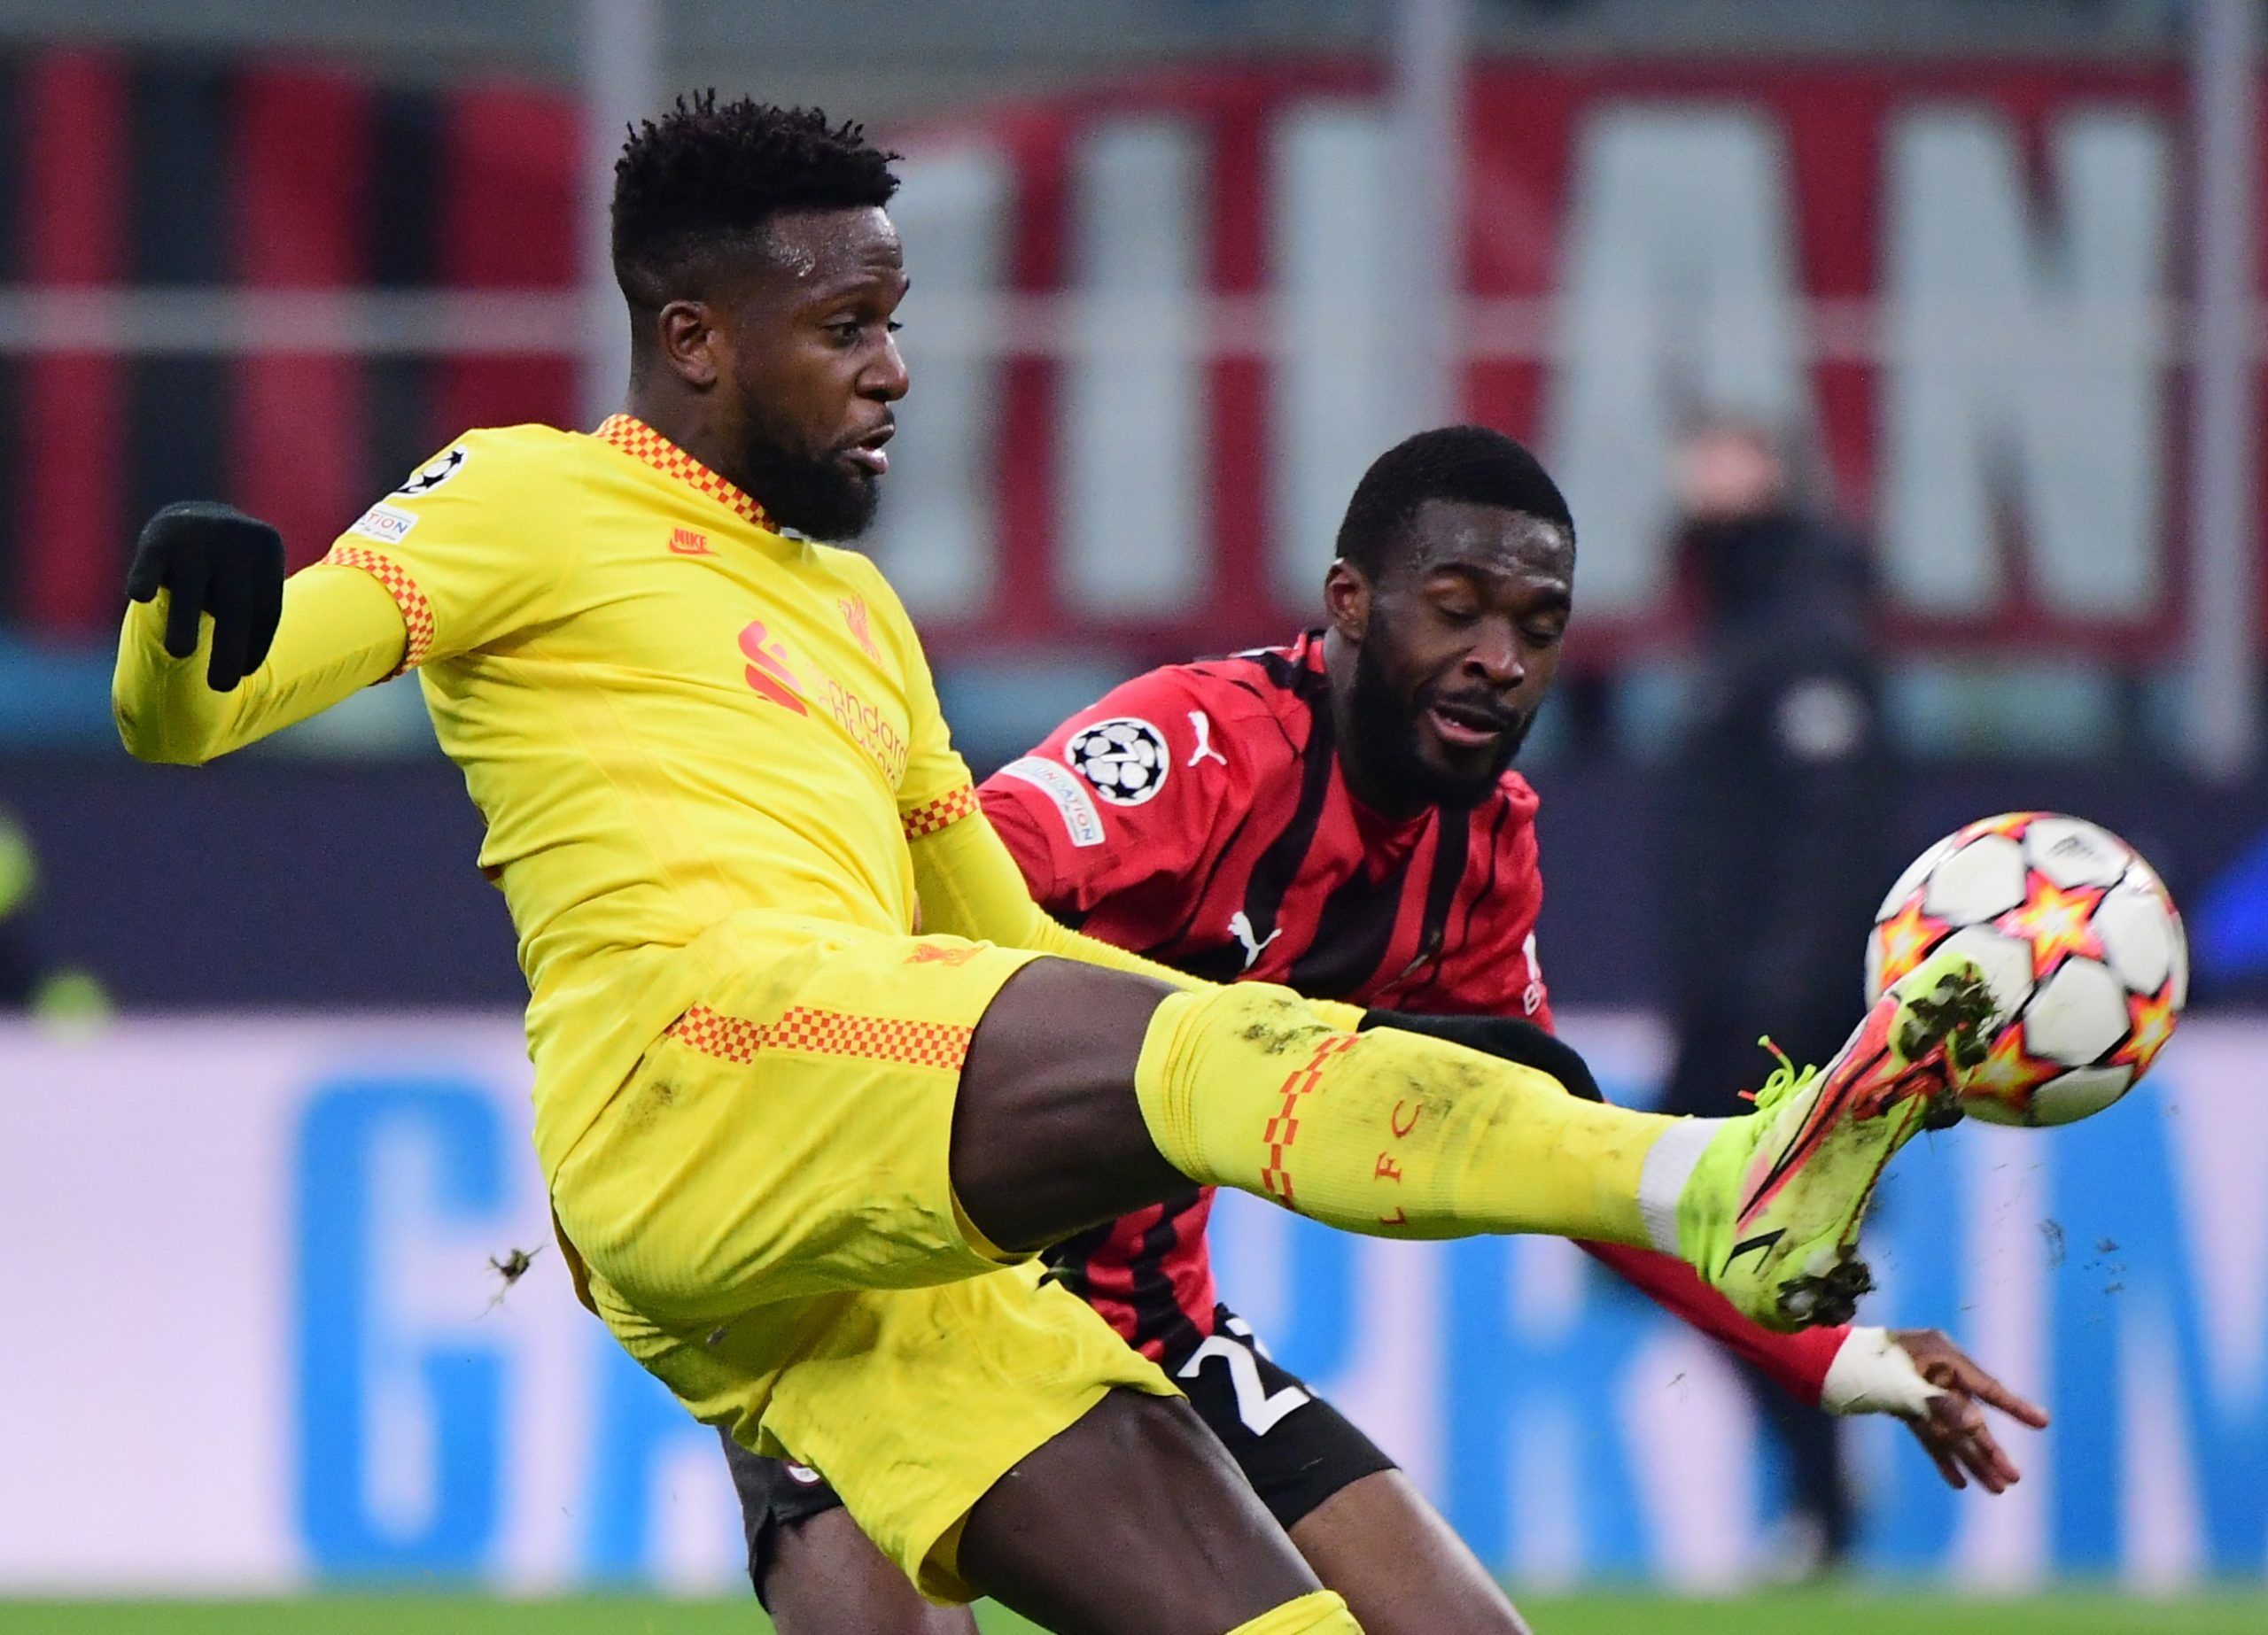 Liverpool: Divock Origi could leave Anfield ‘this week’ -Liverpool News